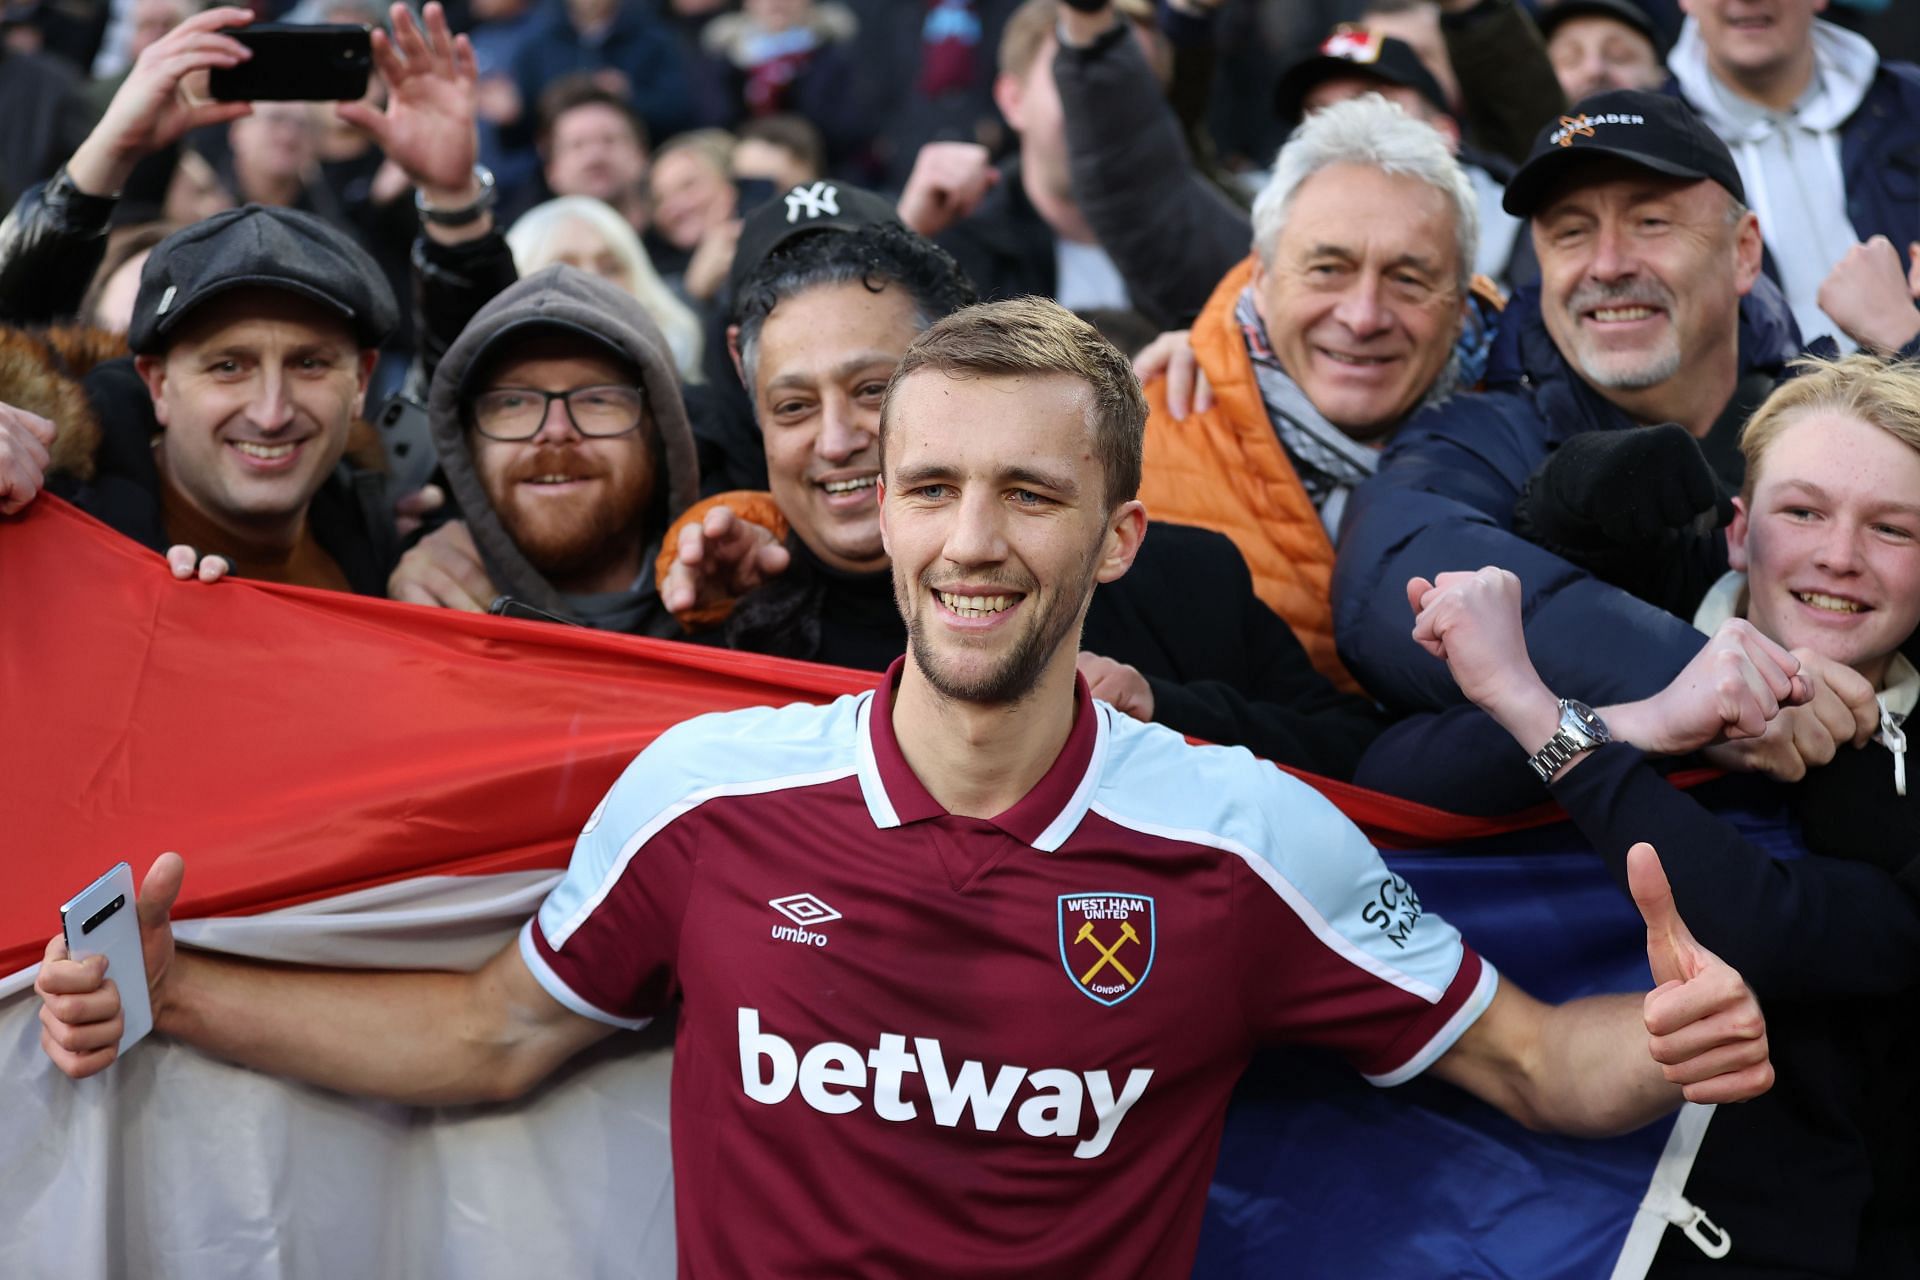 West Ham United came from behind to record an impressive win over Chelsea.